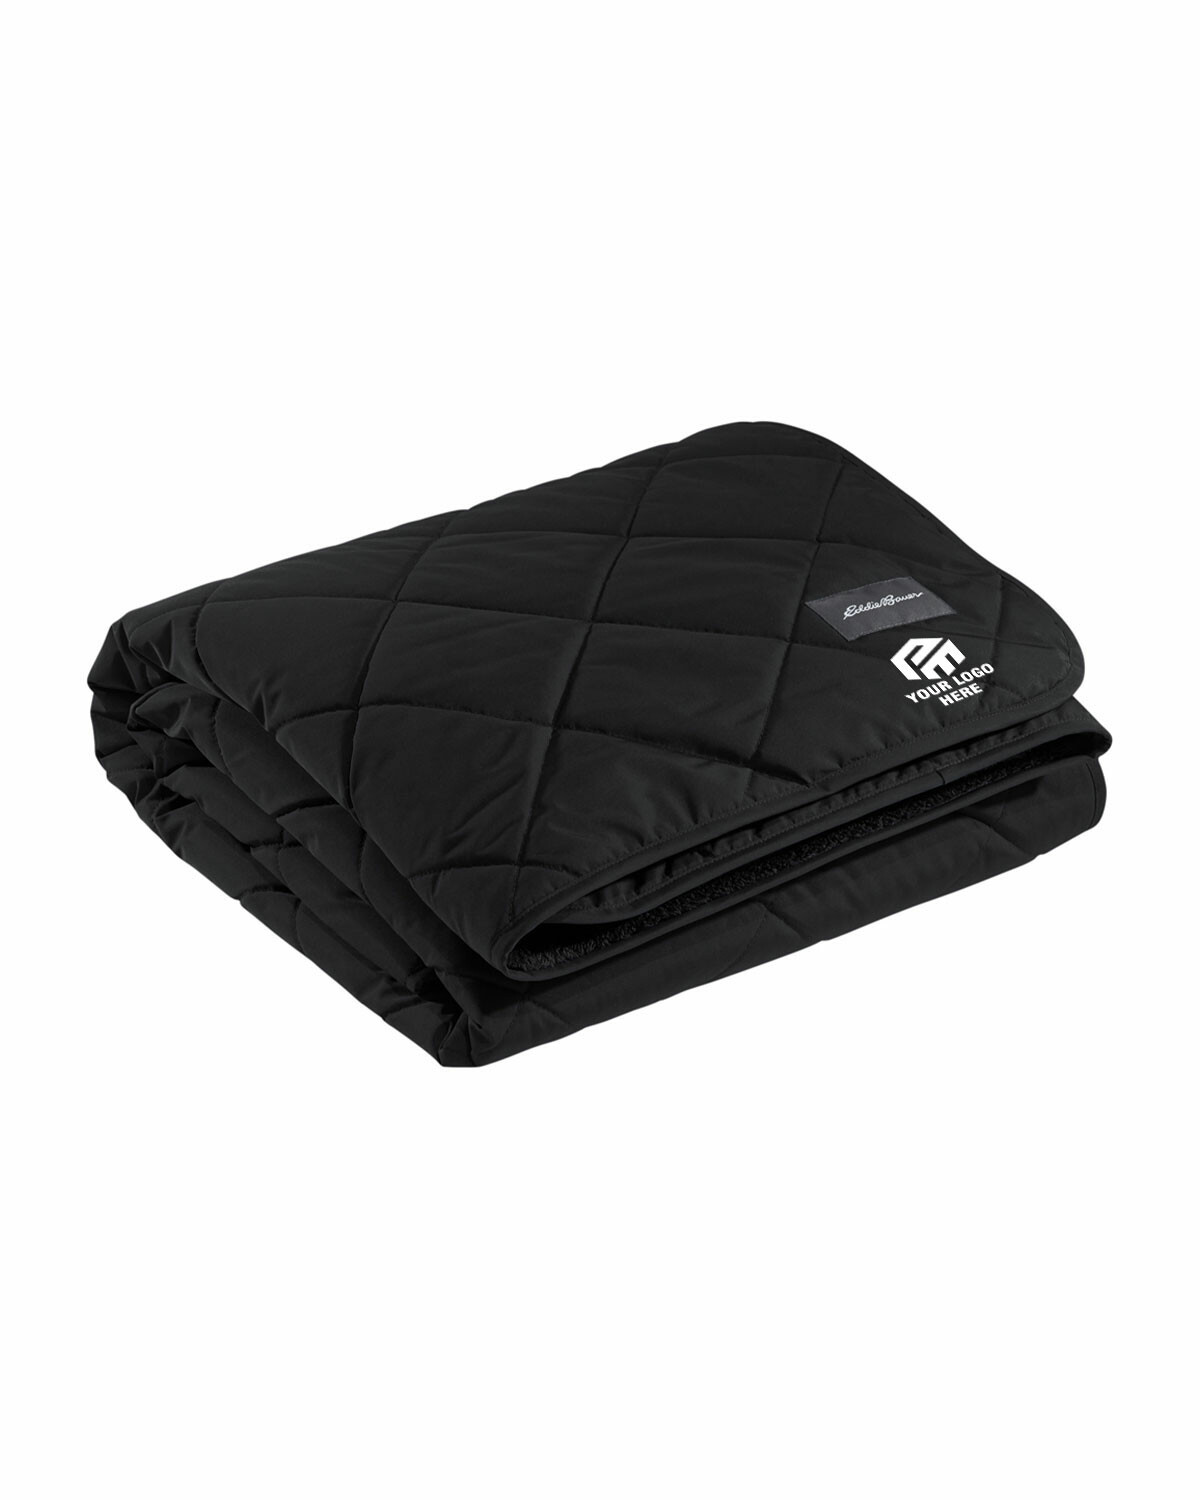 EB751 Quilted Insulated Fleece Blanket custom embroidered or printed with  your logo.